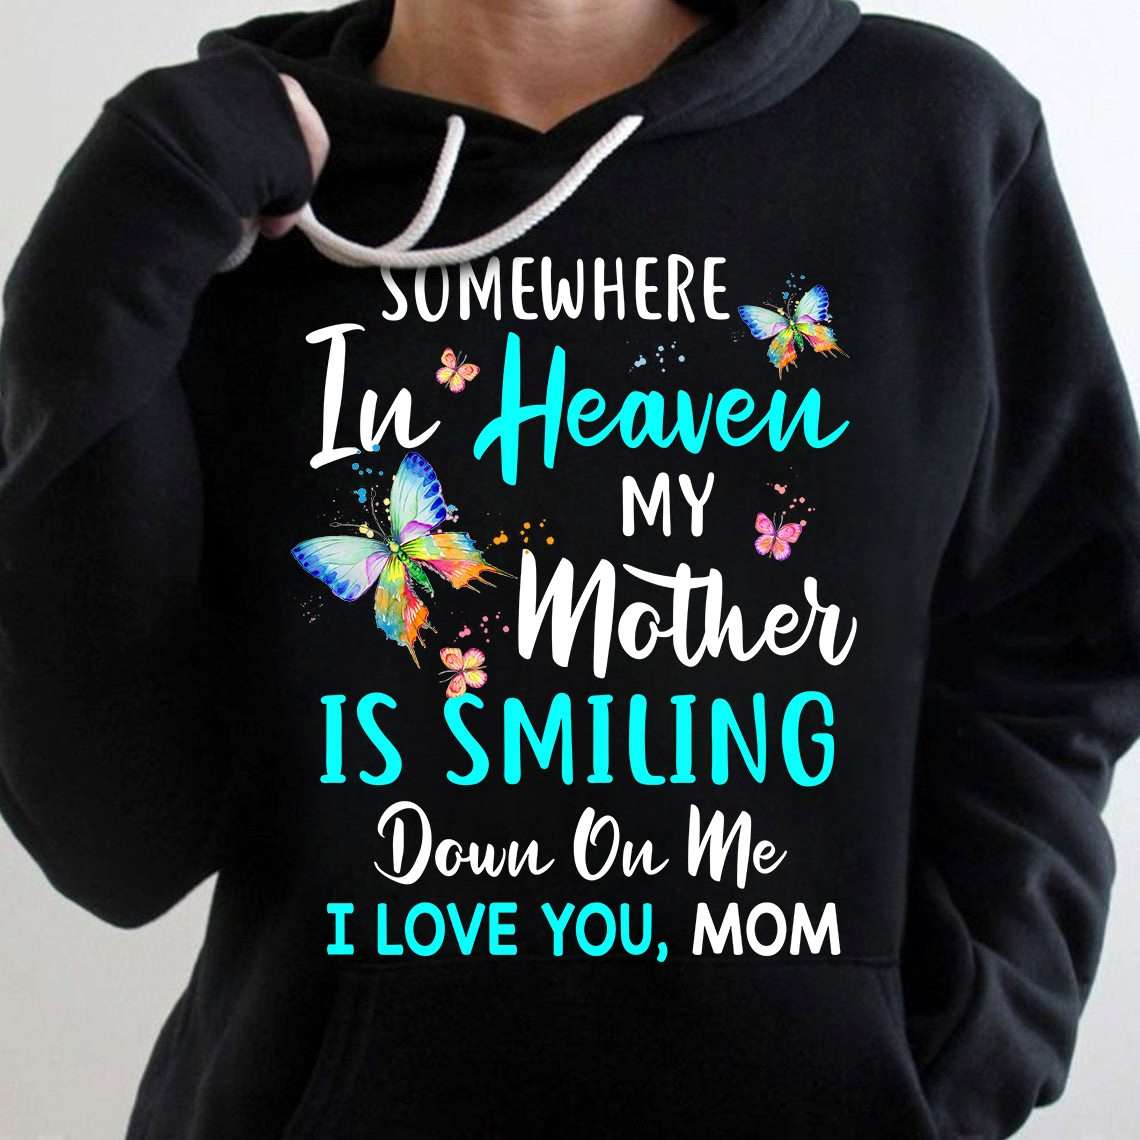 Somewhere in heaven, my mother is smiling down on me - Love you mom, mother's day gift